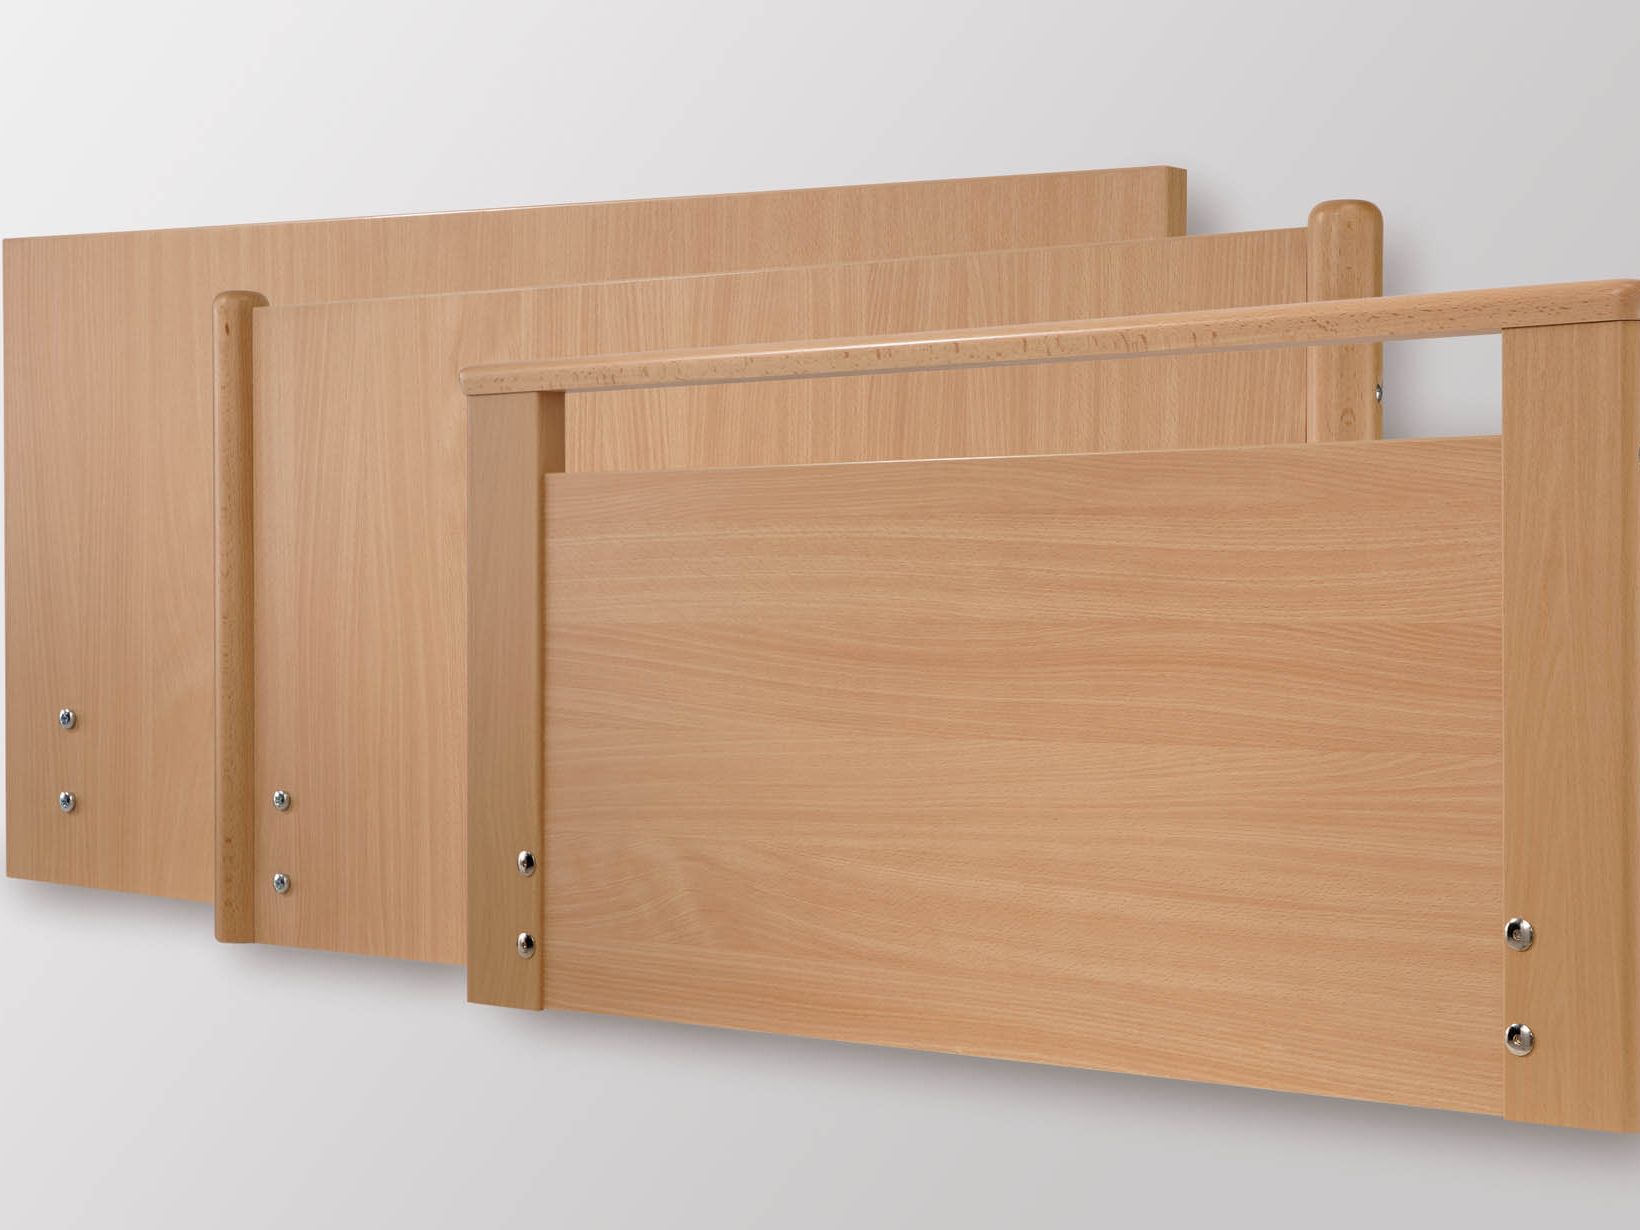 Attractive headboards and footboards for the Westfalia care bed range